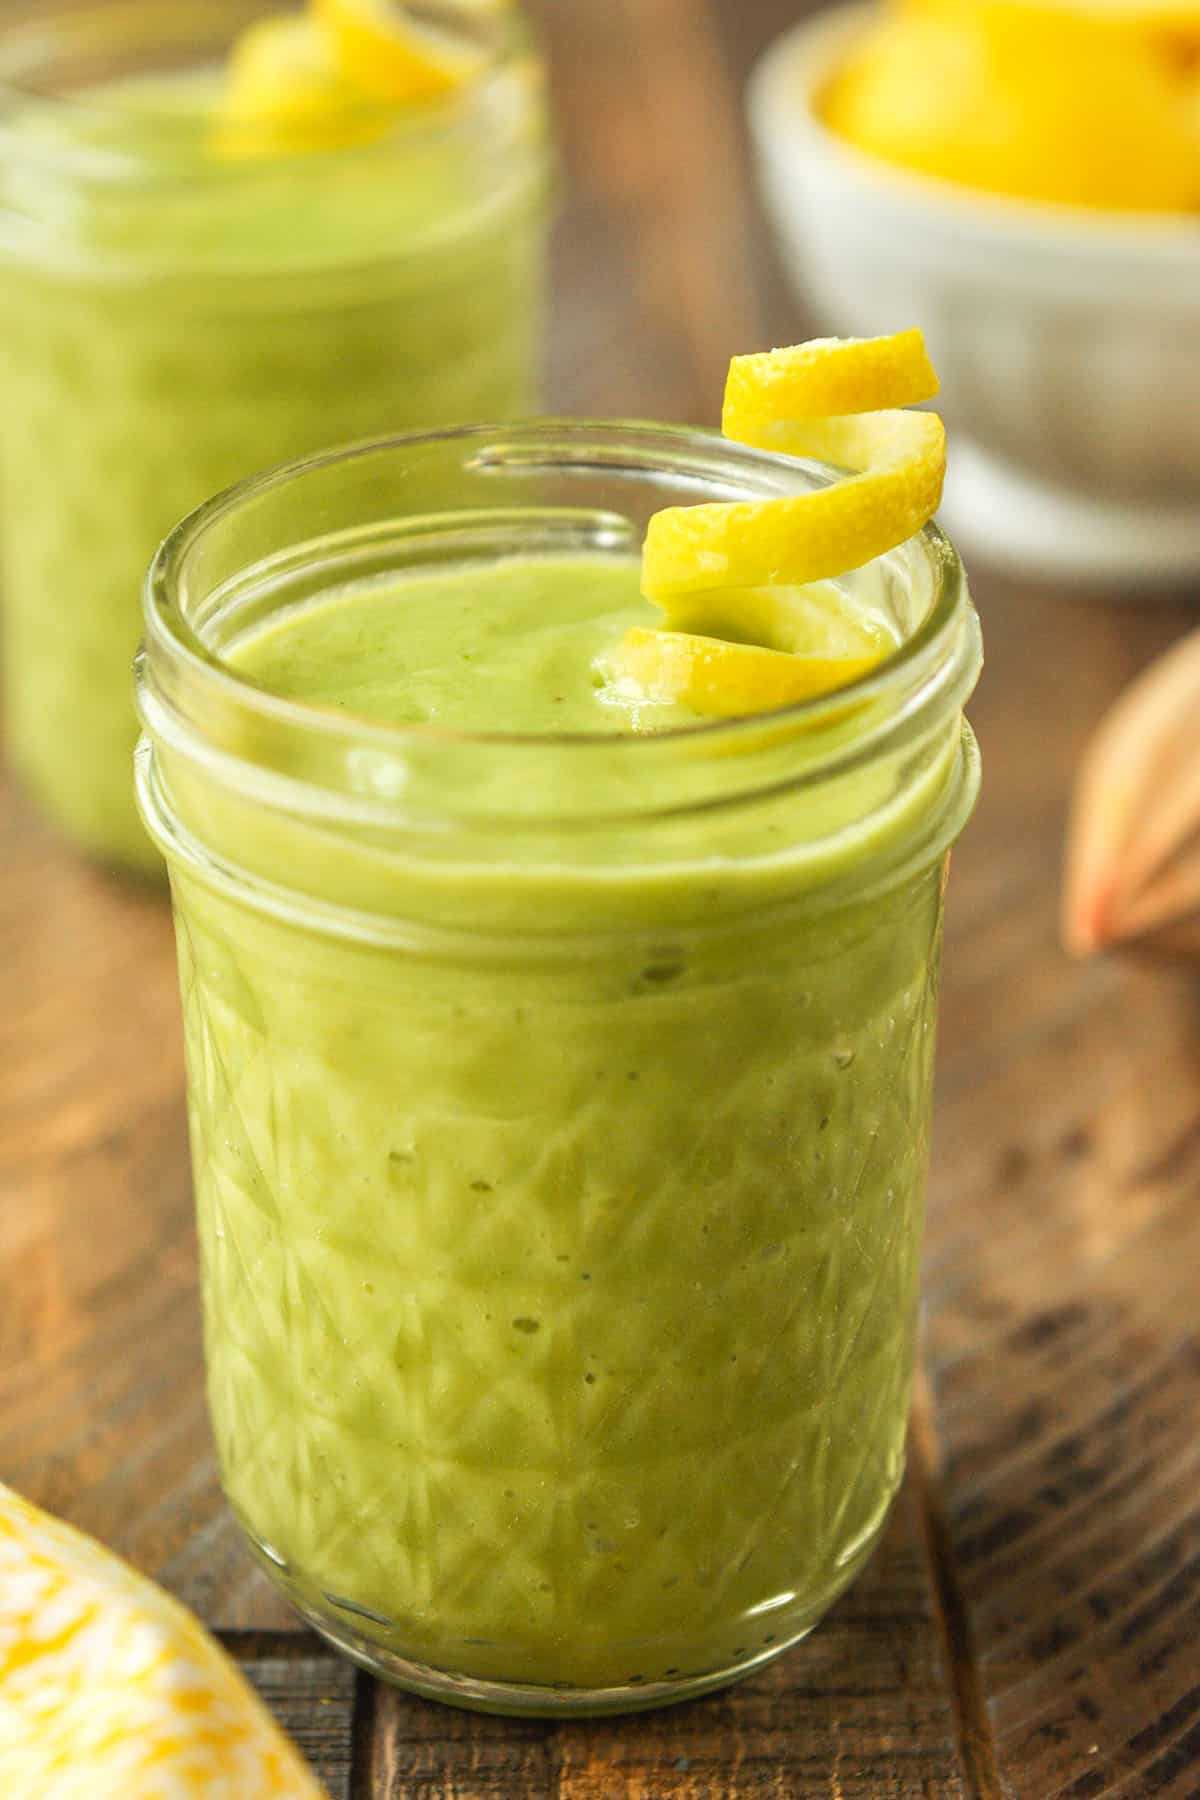 Up close of lemon green smoothie with a twist of lemon peel and a yellow and white striped straw.